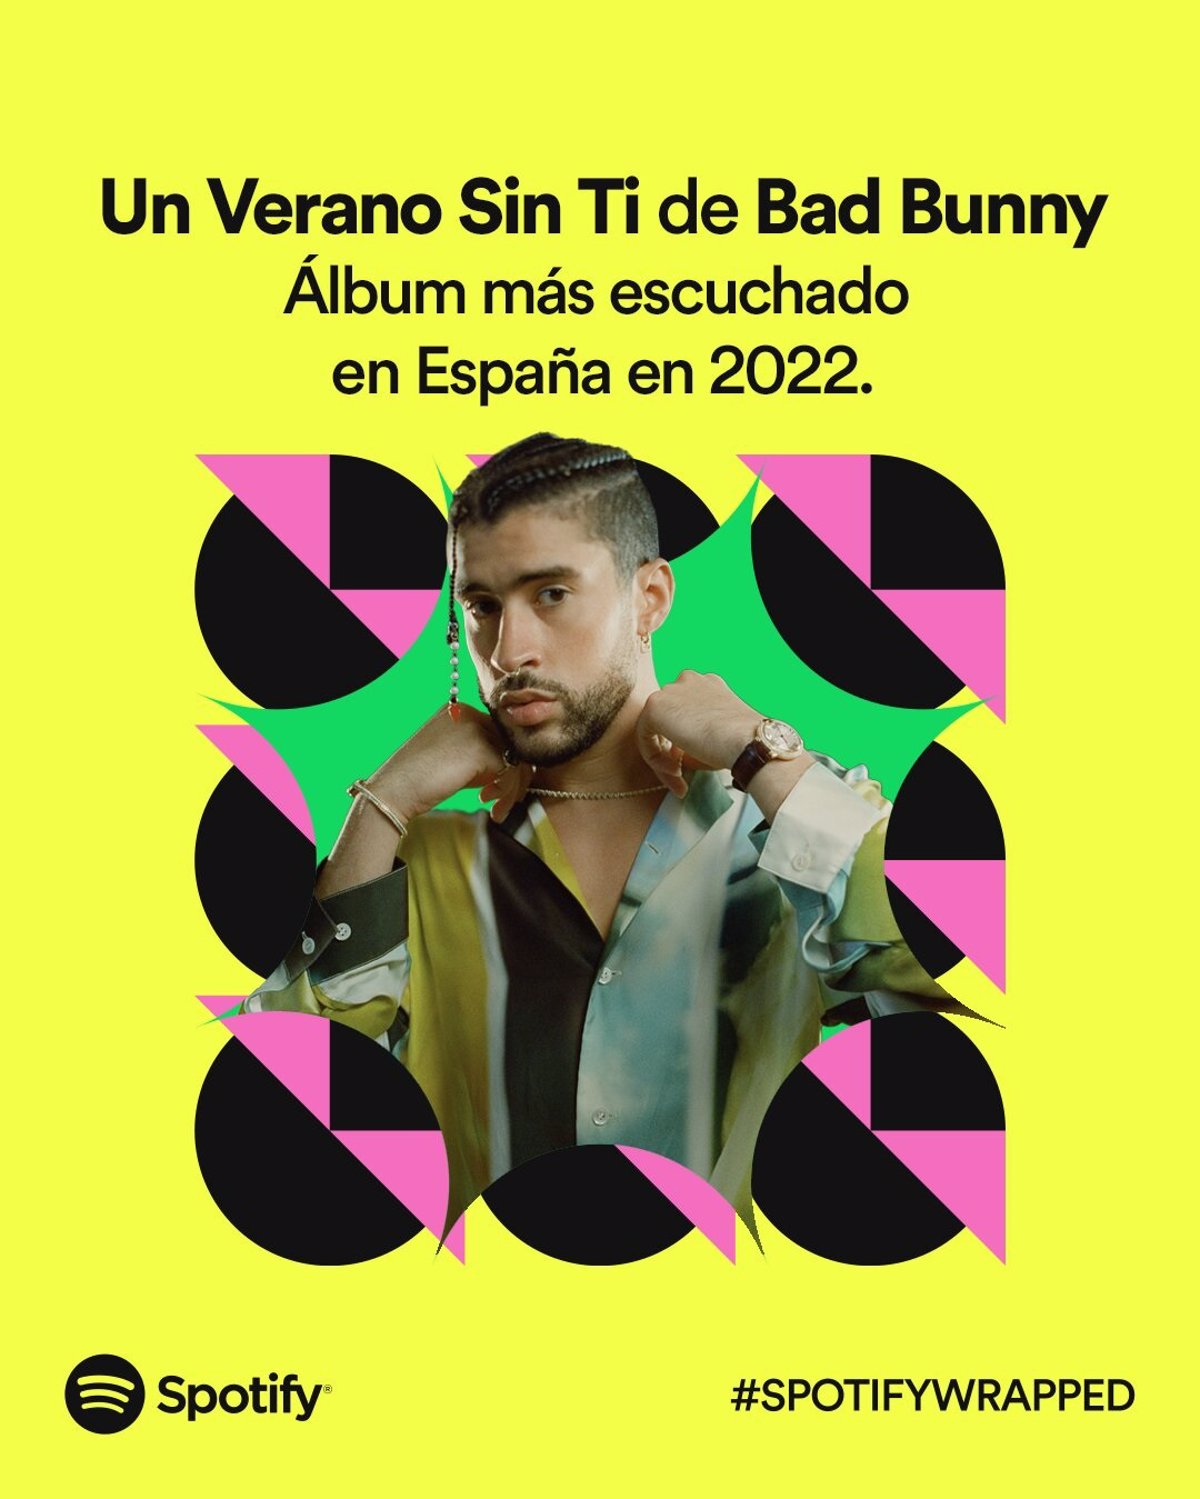 Bad Bunny repeats for the third consecutive year as the most listened to artist in the world on Spotify